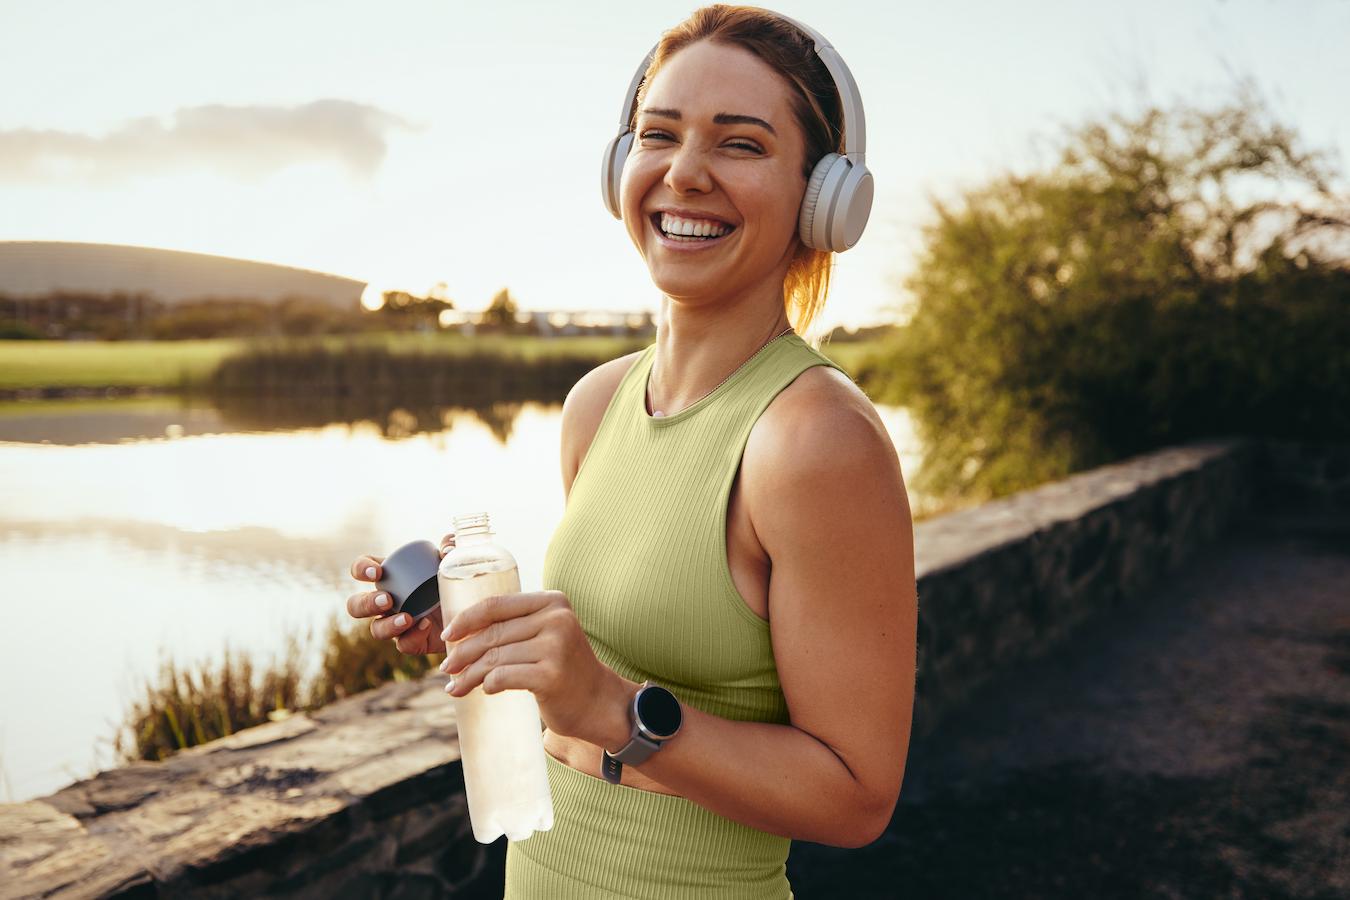 a woman smiling doing an outdoor workout positive outcomes human flourishing underlying mechanisms experimental research involves emotional well being overall mental health issues positive emotions emotional well being mental health